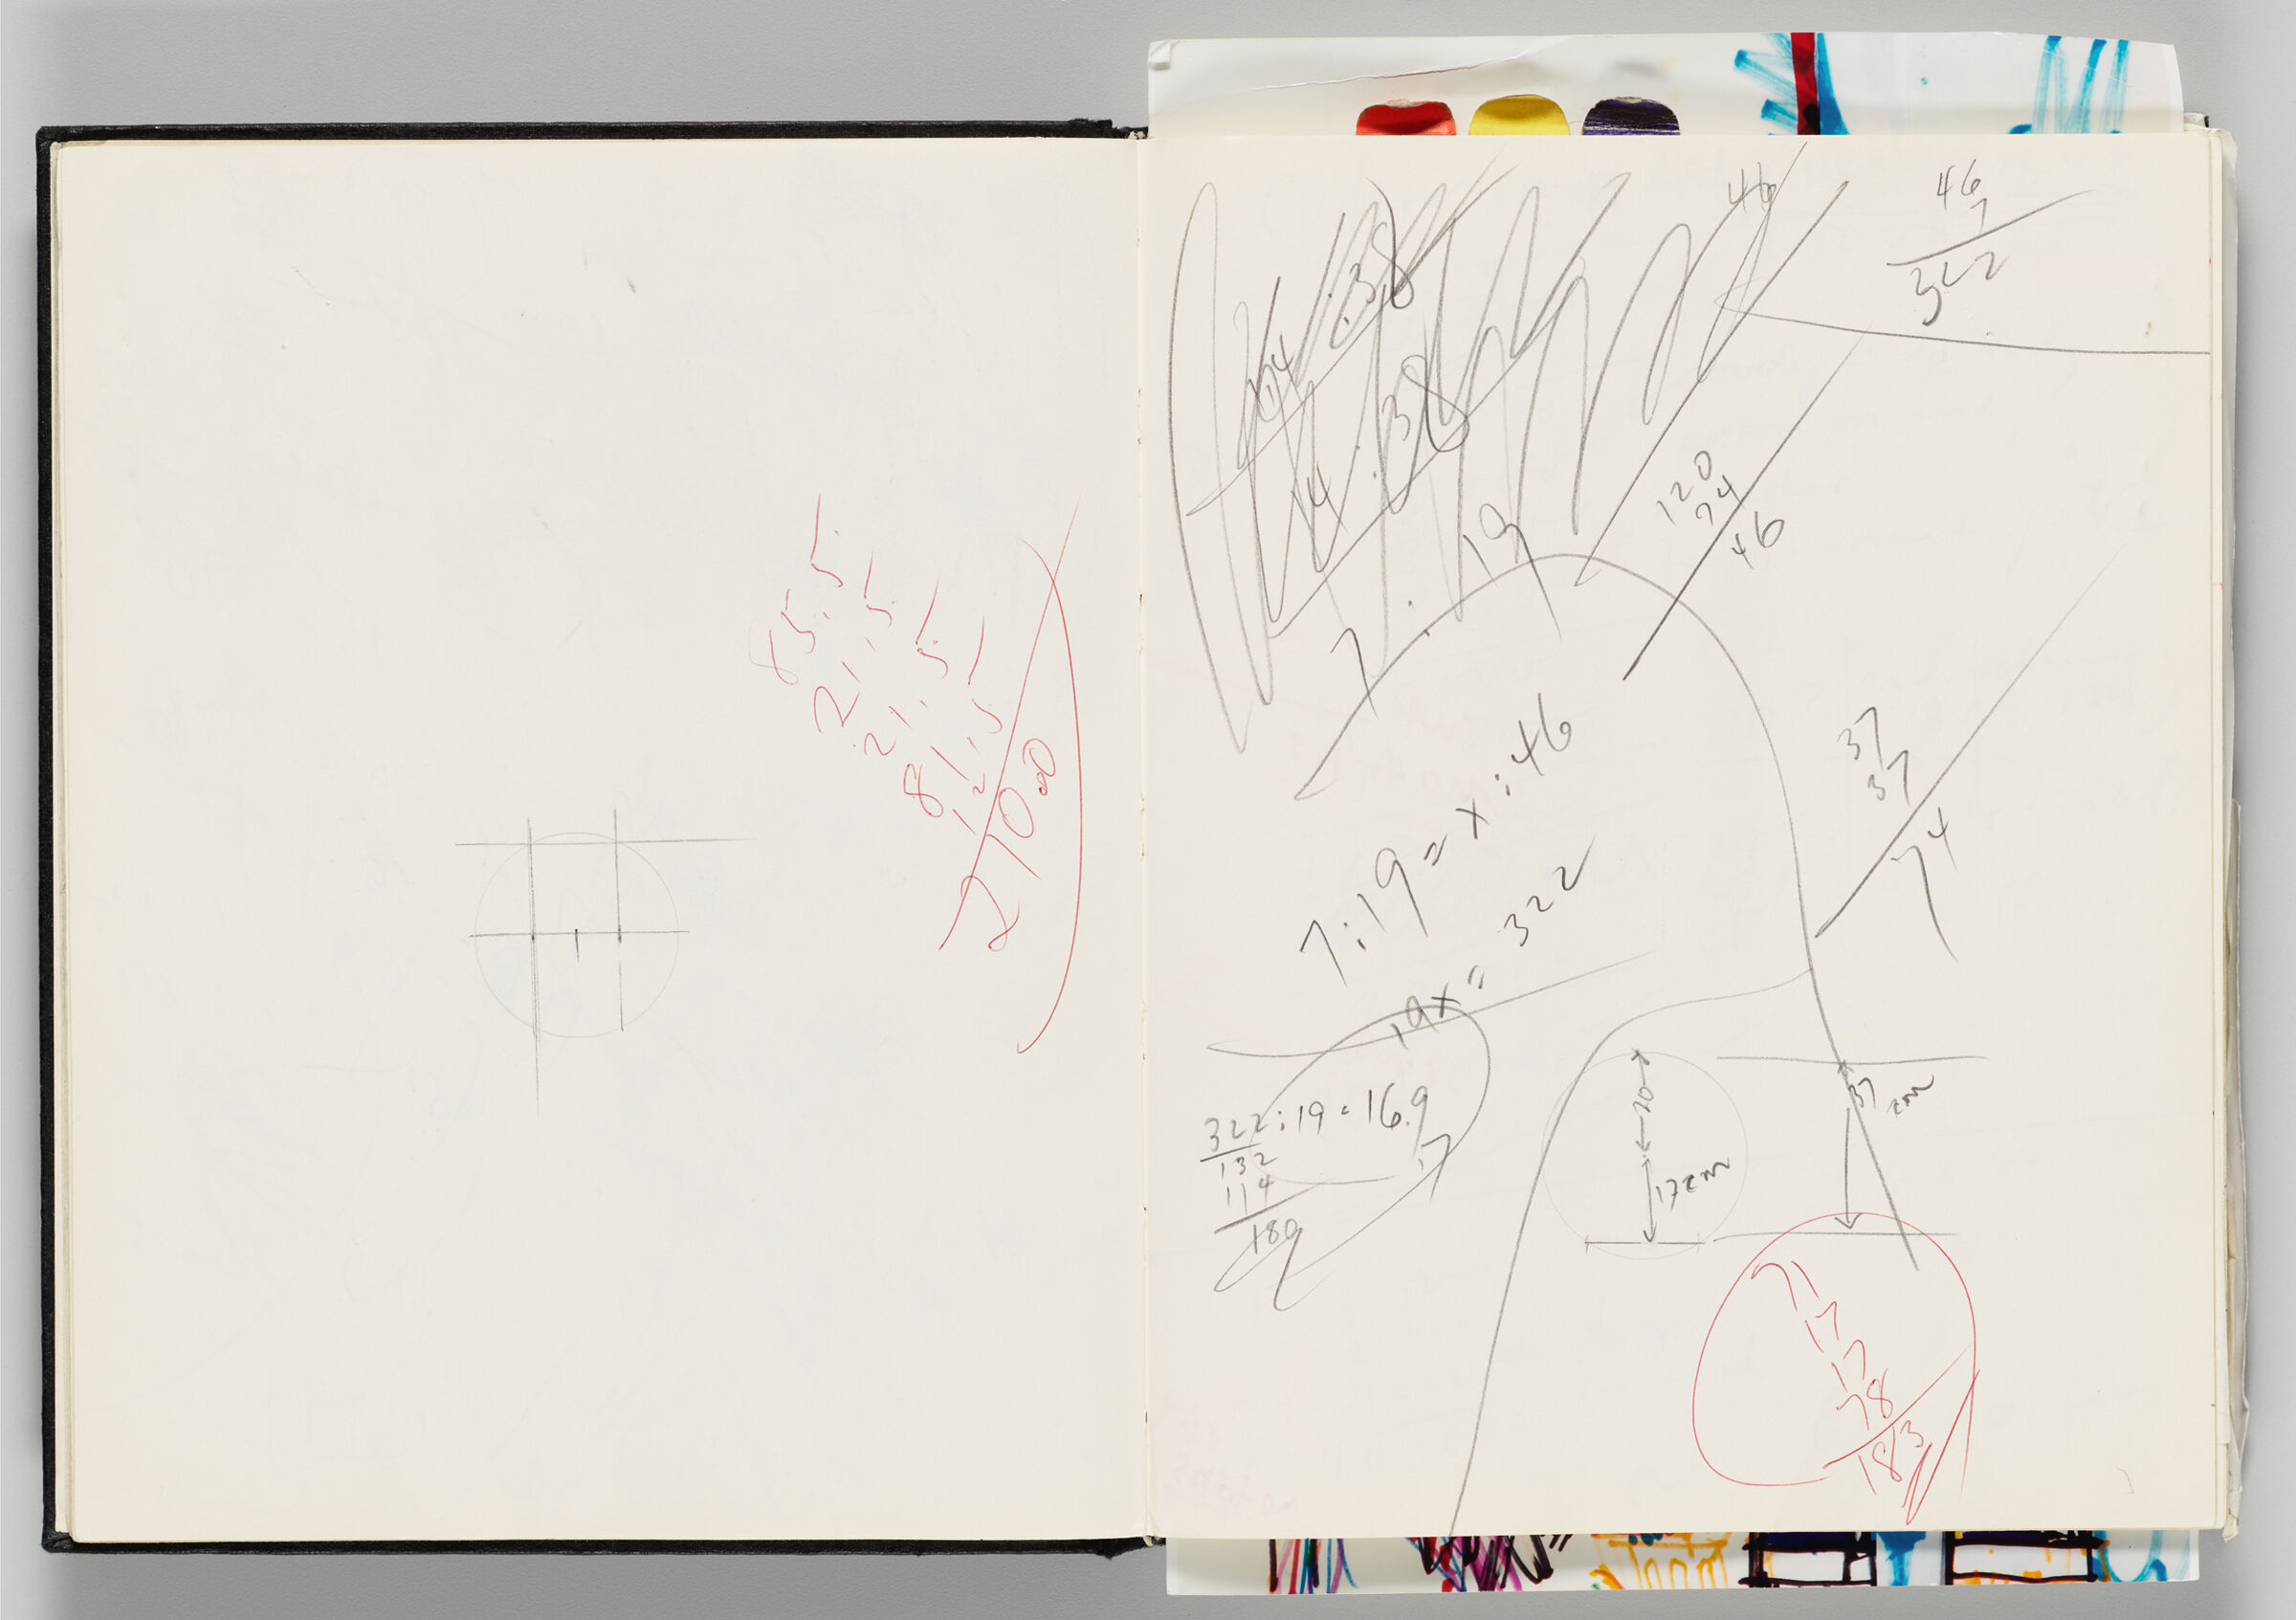 Untitled (Design And Notes, Left Page); Untitled (Budget Calculations, Right Page)